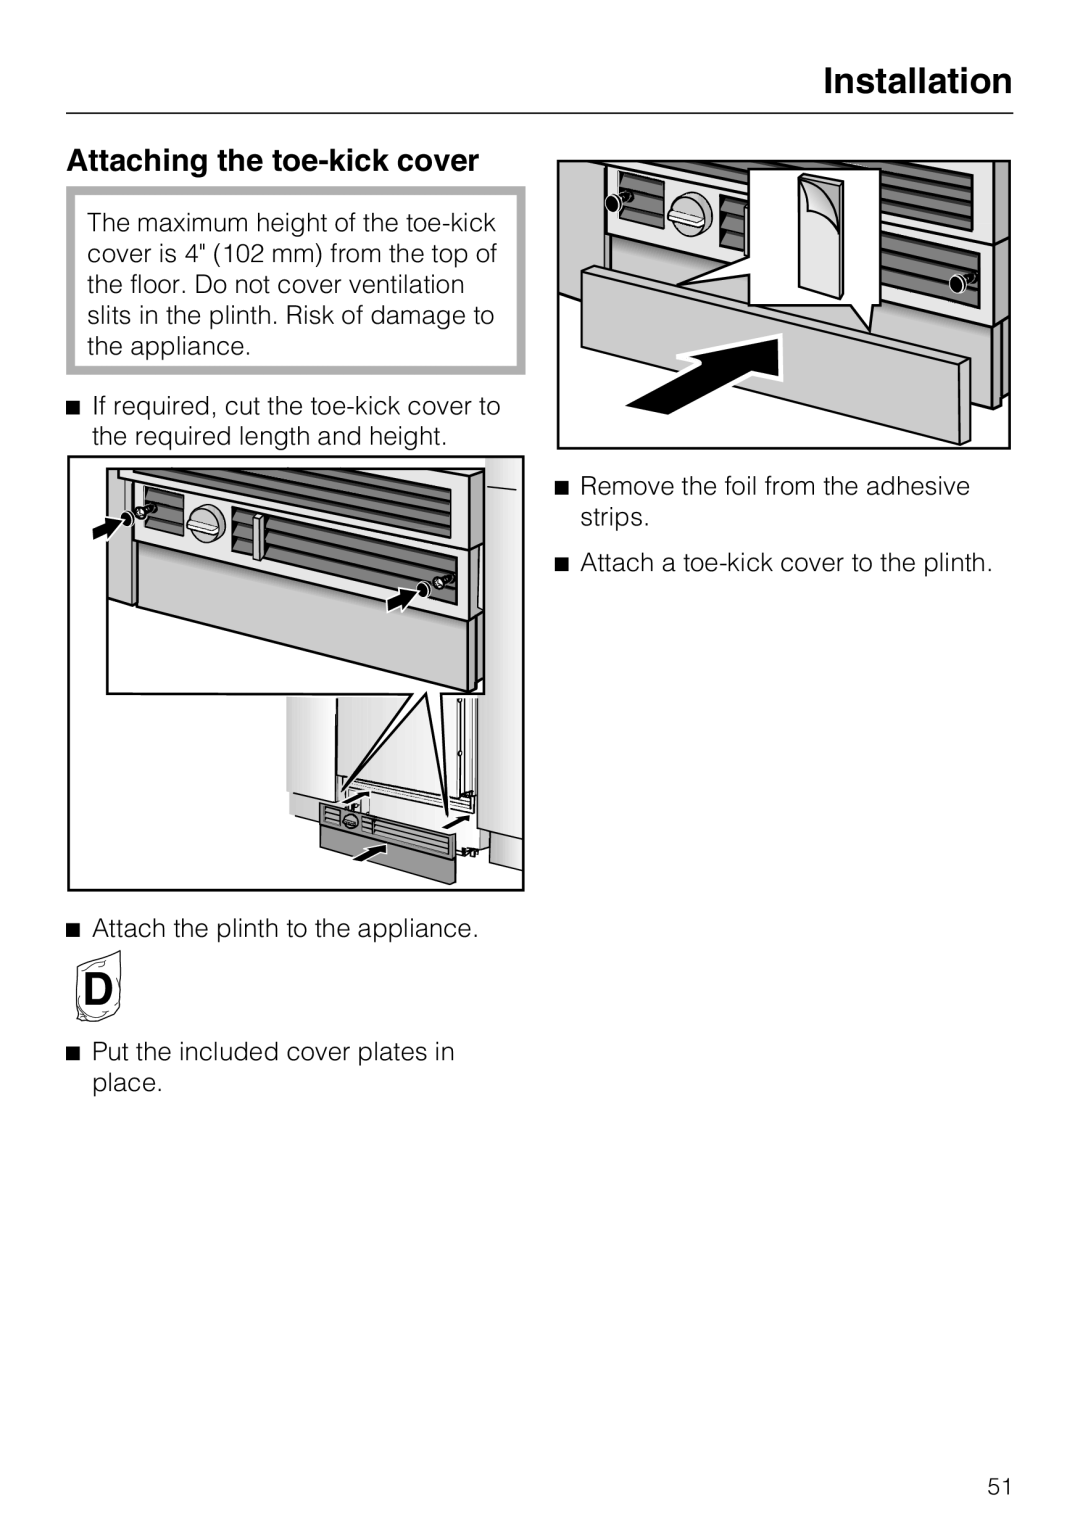 Miele KWT1601SF, KWT1611SF installation instructions Attaching the toe-kickcover, Installation 